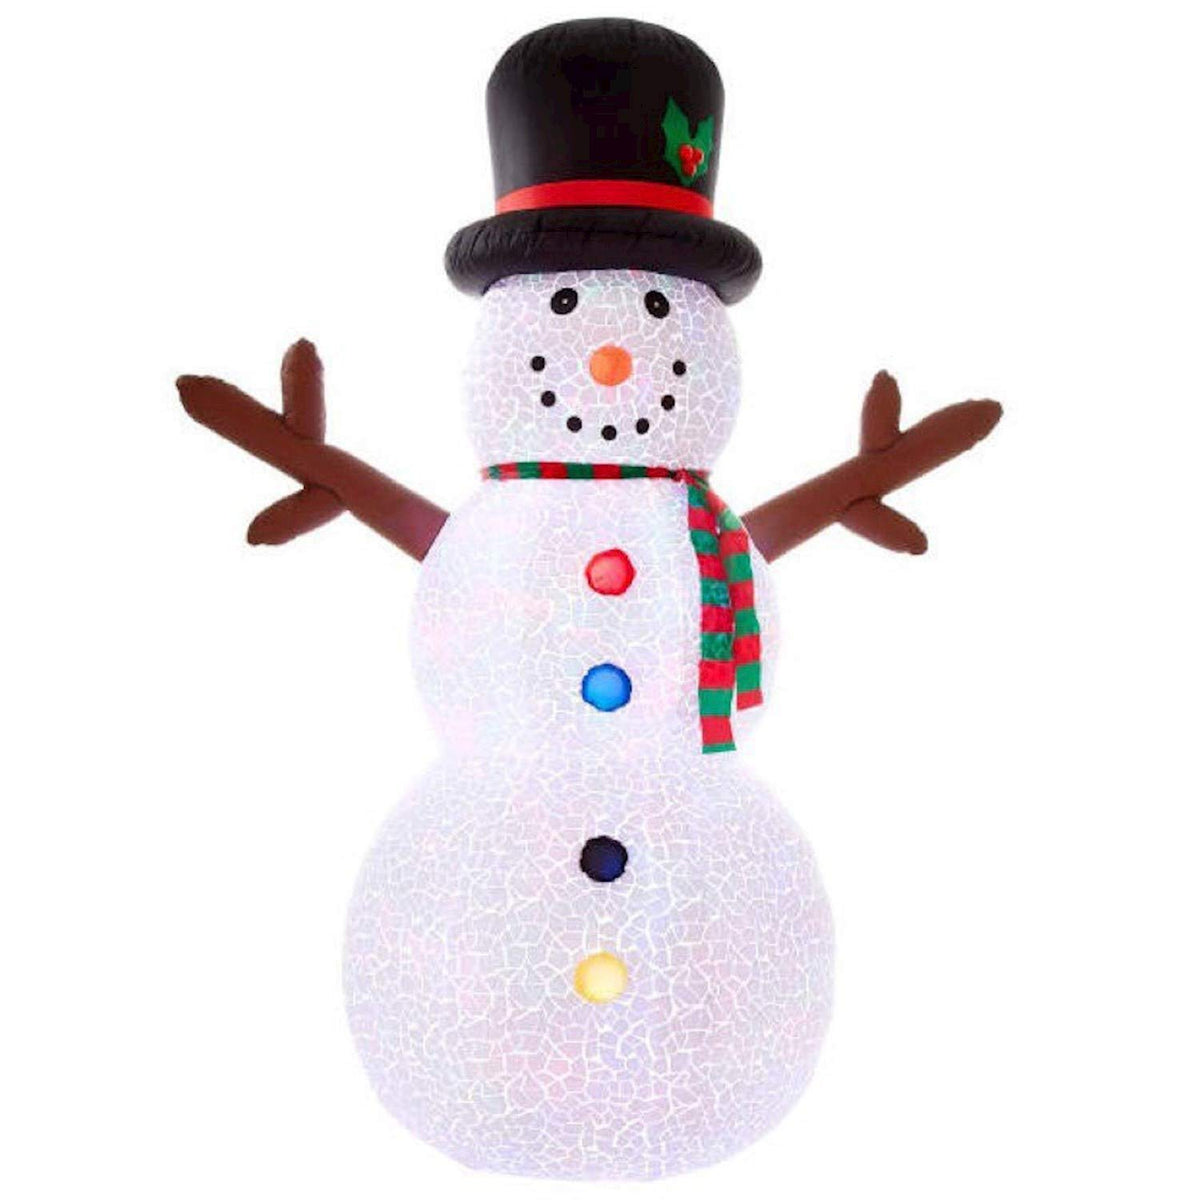 Santas Forest 90223 Inflatable Christmas Snowman w/ LED Internal Projection, 8'